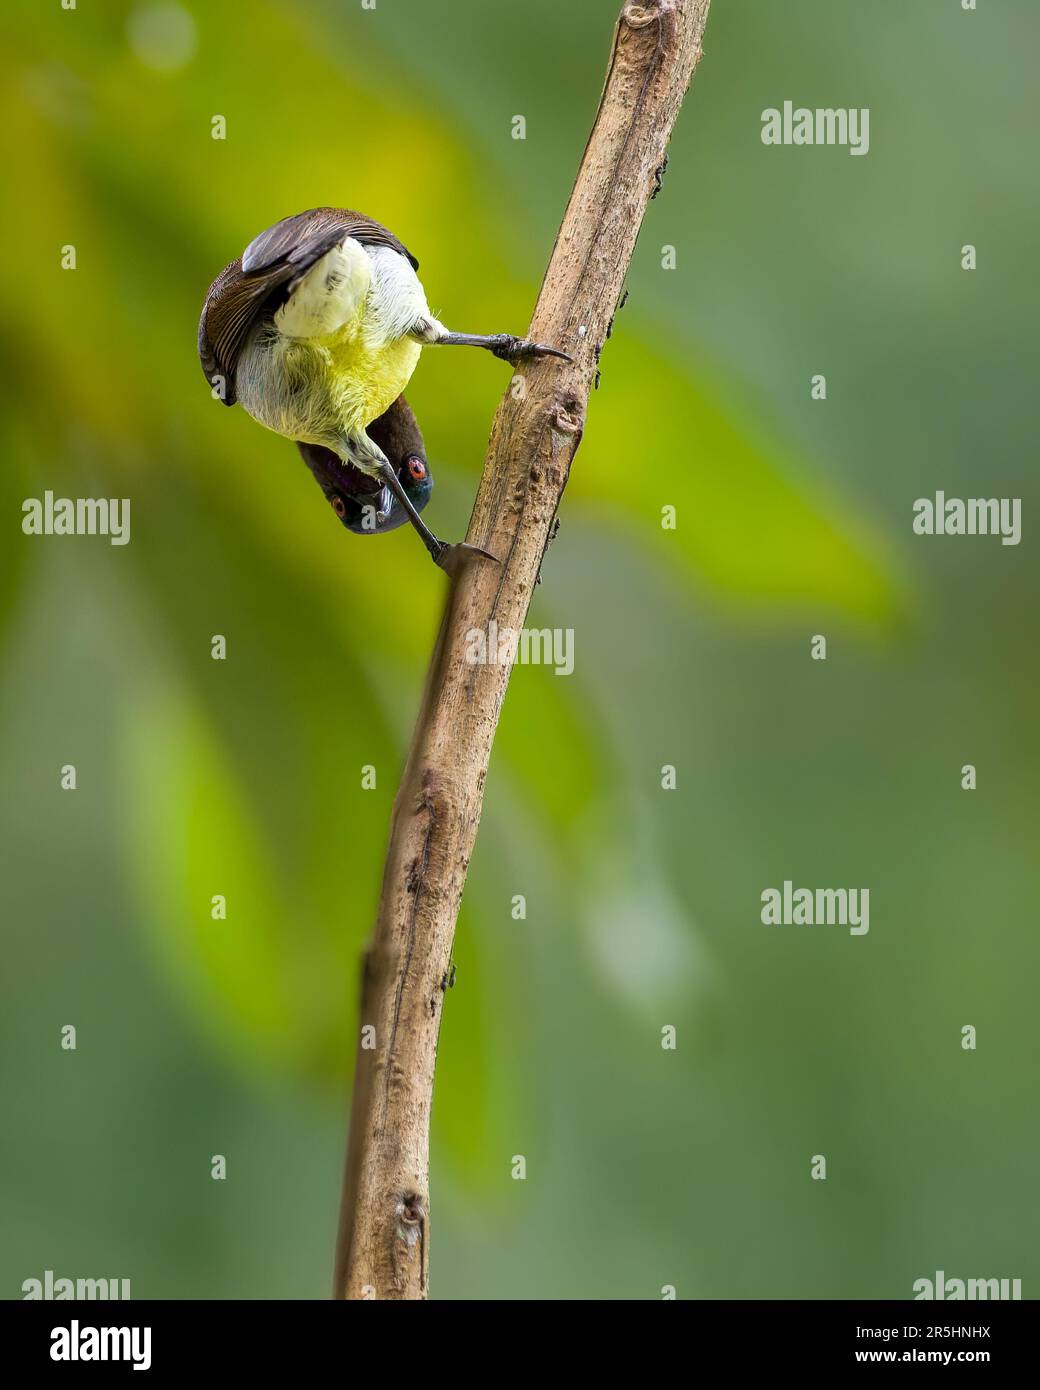 Songbird holds onto a branch and looks awkwardly through its legs while bending, Funny bird moment. Stock Photo